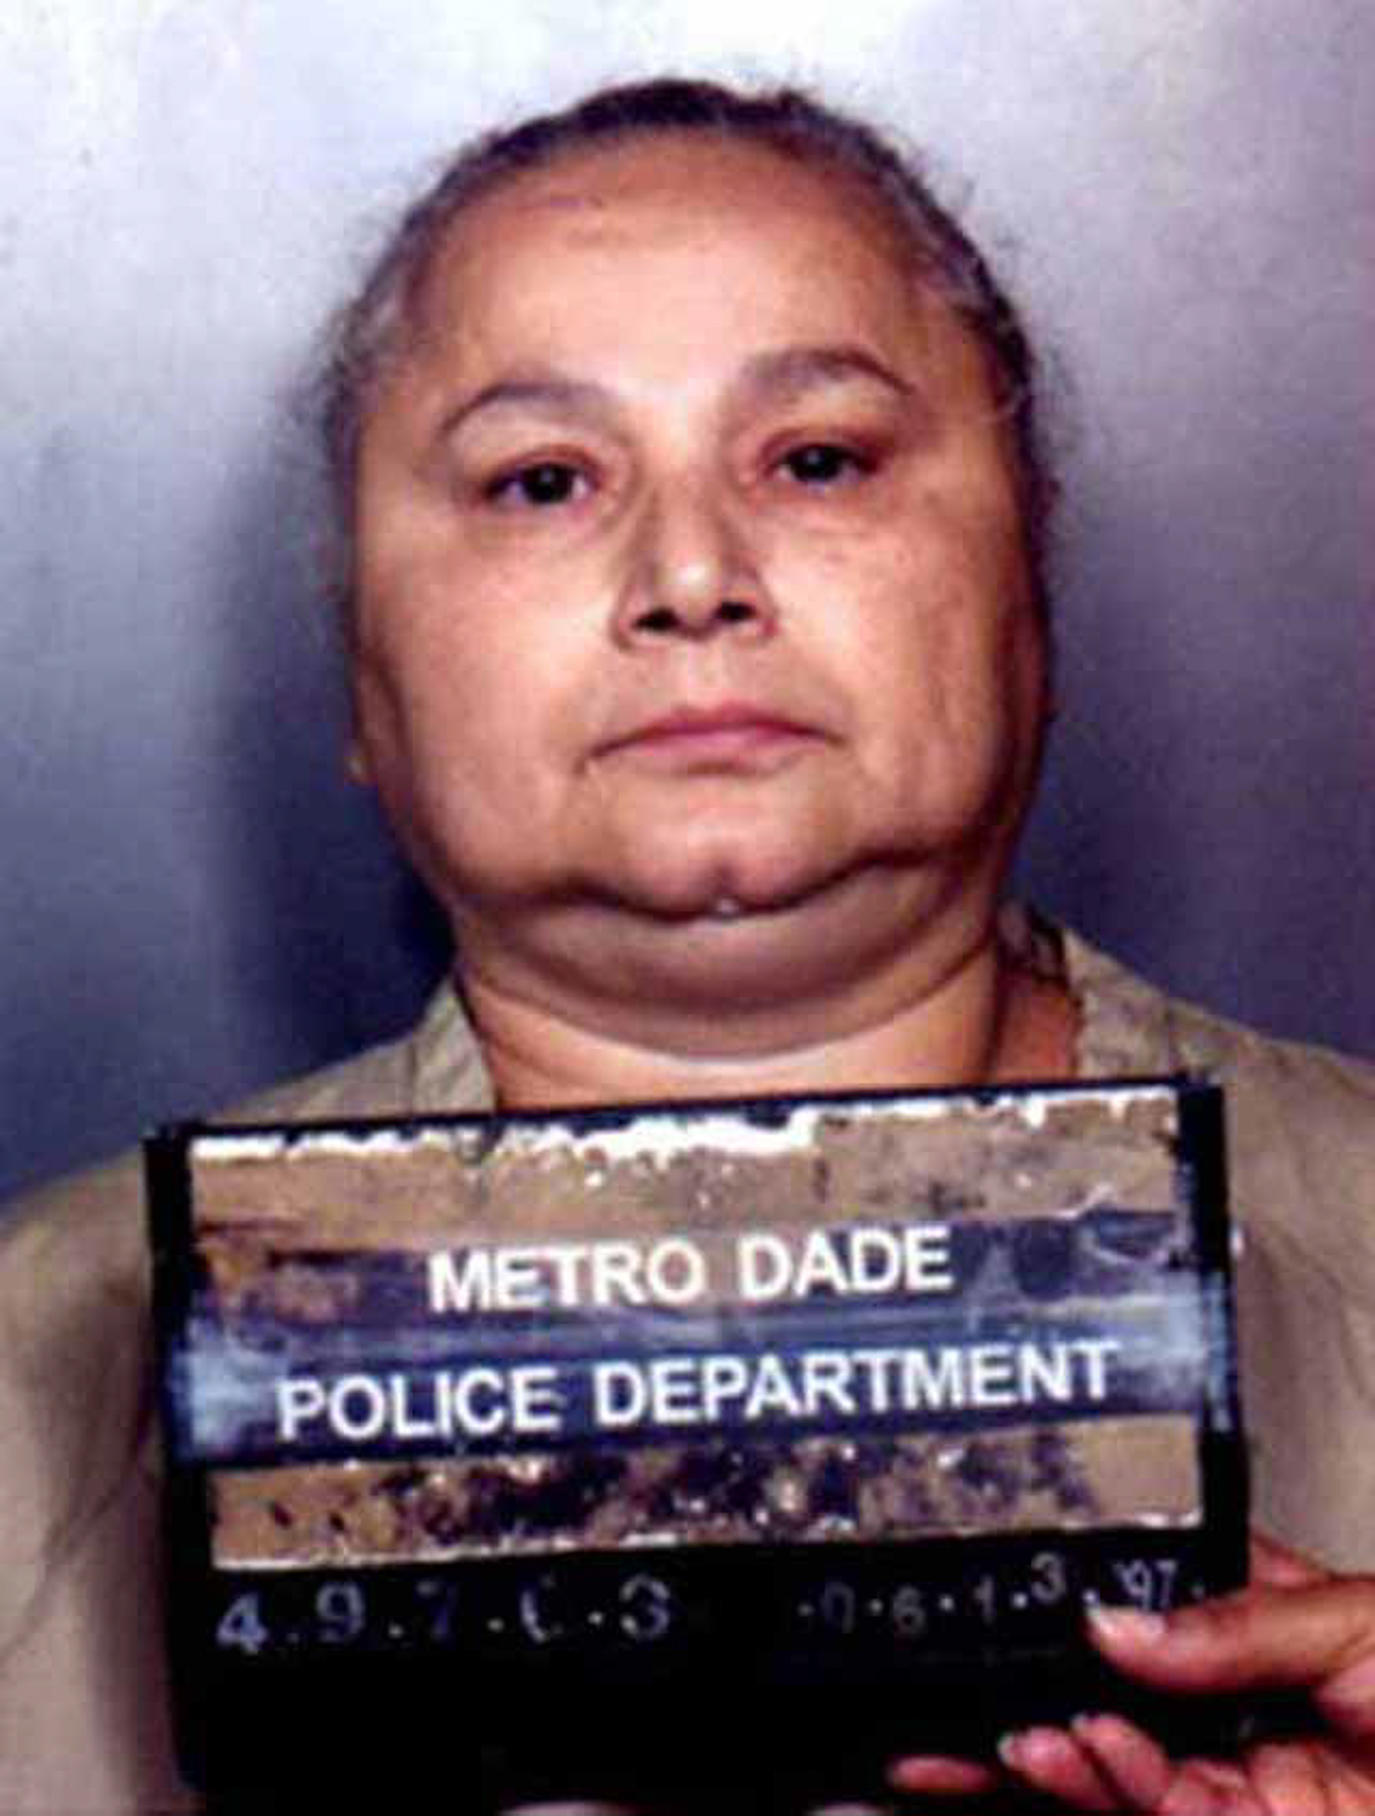 The show is based on Griselda Blanco, a Columbian drug lord